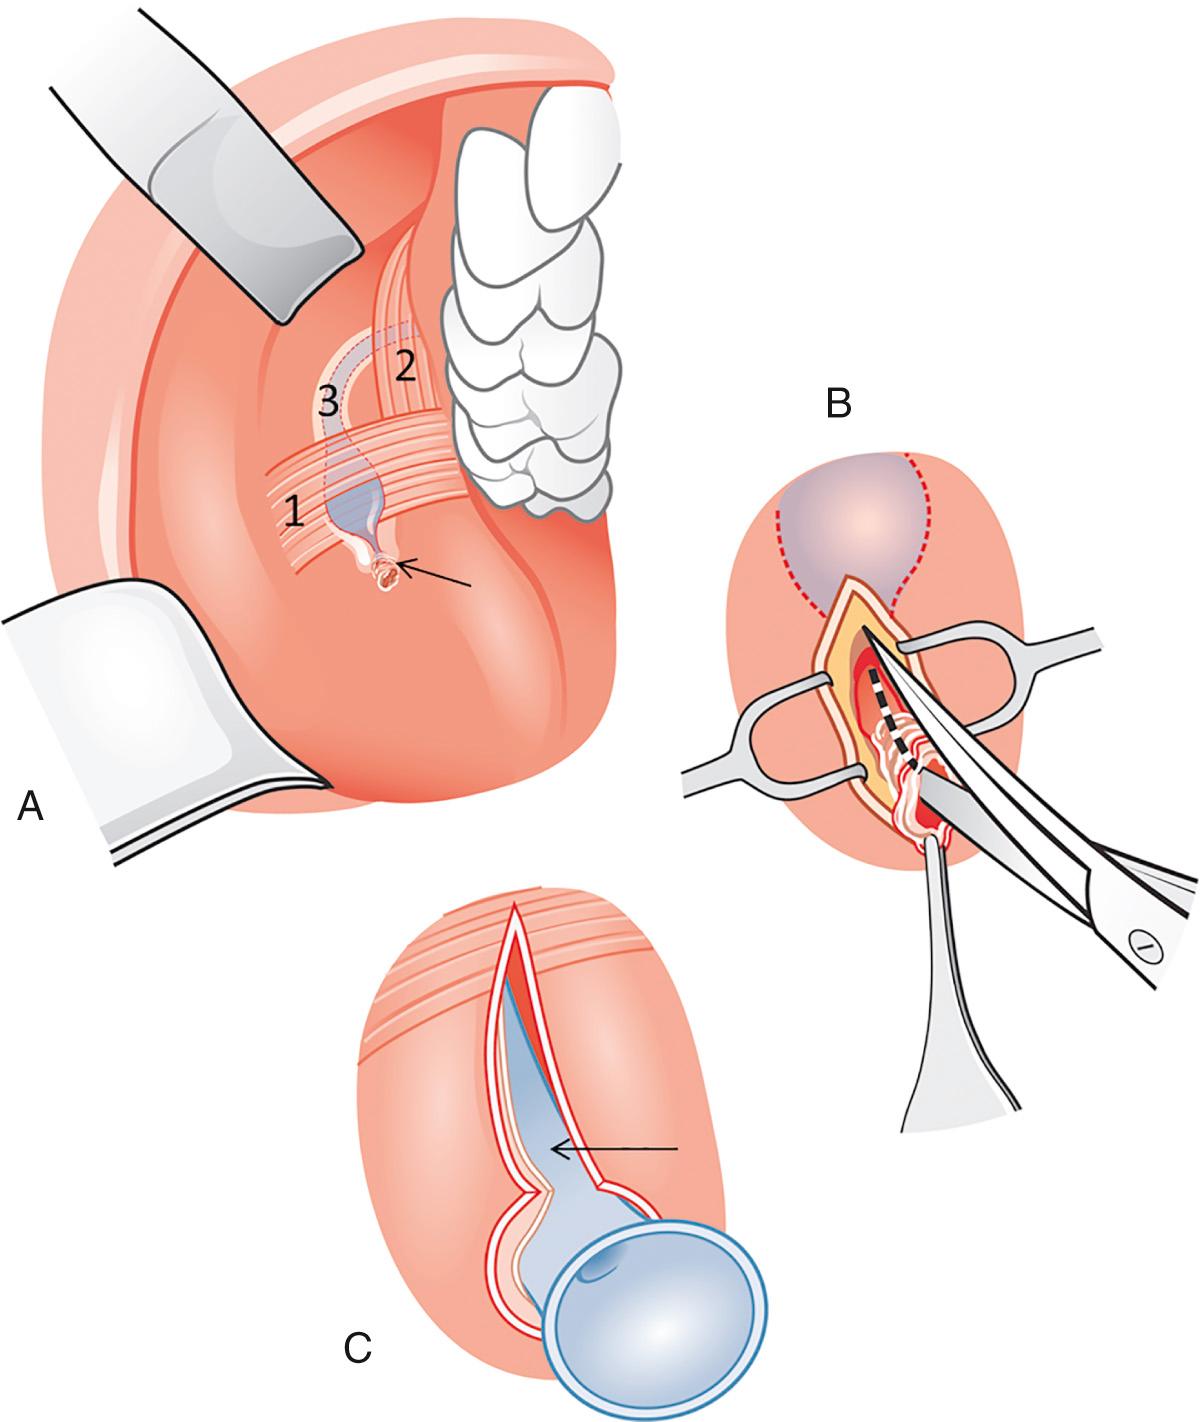 Fig. 28.2, Distal duct slitting/incision in papillary stenosis. (A) Short stenosis with residual lumen at or very near to the papilla (arrow). (B) Duct incision is performed through all layers of the scarred and stenotic part of the duct. Because no marsupialization can be performed, stent implantation is mandatory. (C) Situation after the stent (arrow) was positioned within the duct system. 1, buccinator muscle; 2, masseter muscle; 3, Stensen's duct.